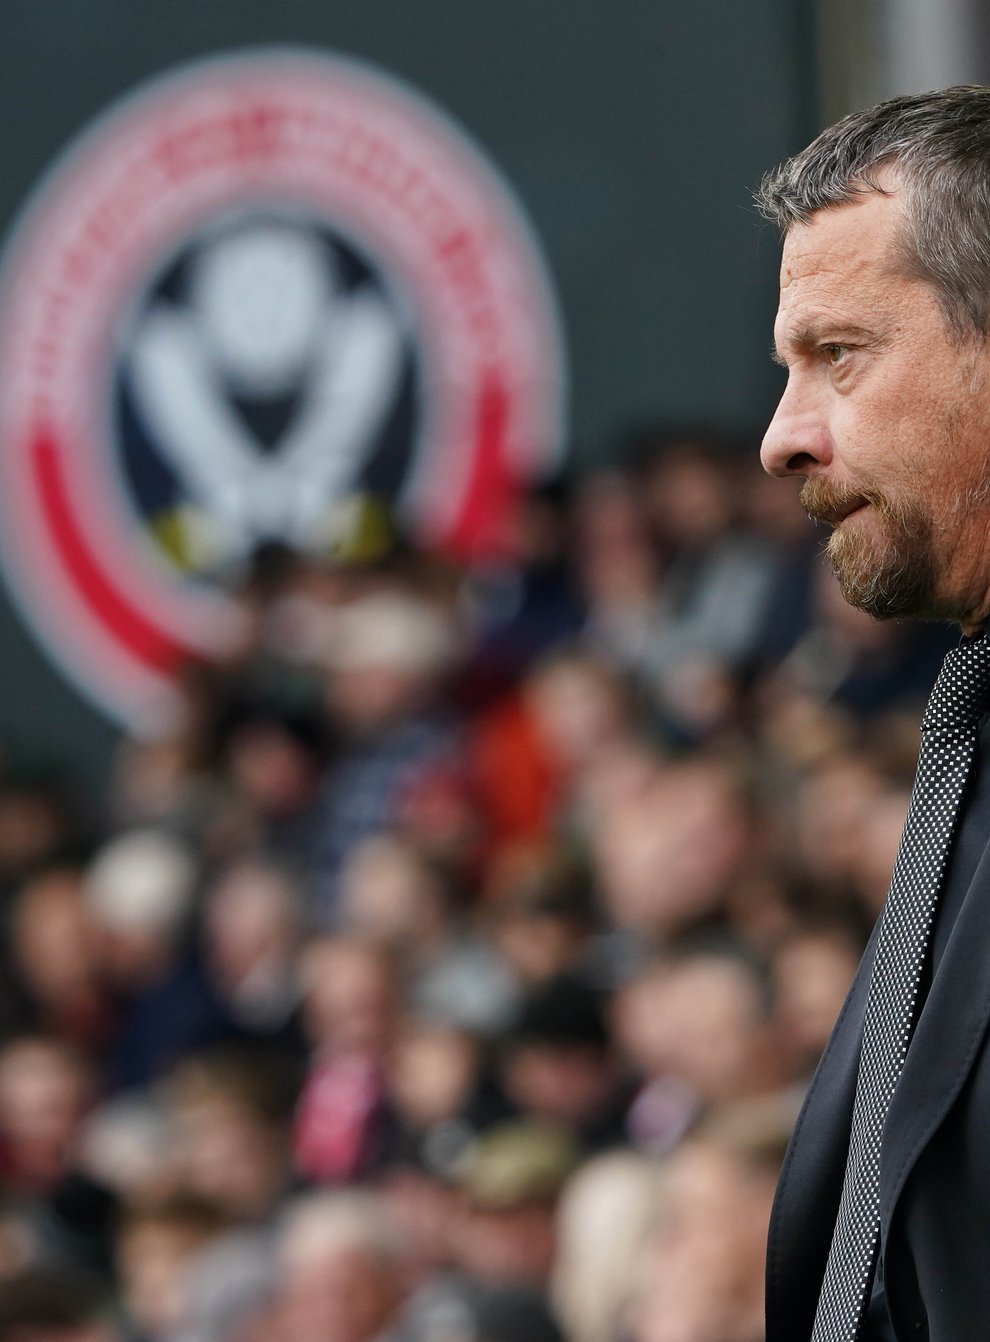 Sheffield United manager Slavisa Jokanovic was unhappy with his side’s performance in a goalless draw with Coventry (Zac Goodwin/PA Images).